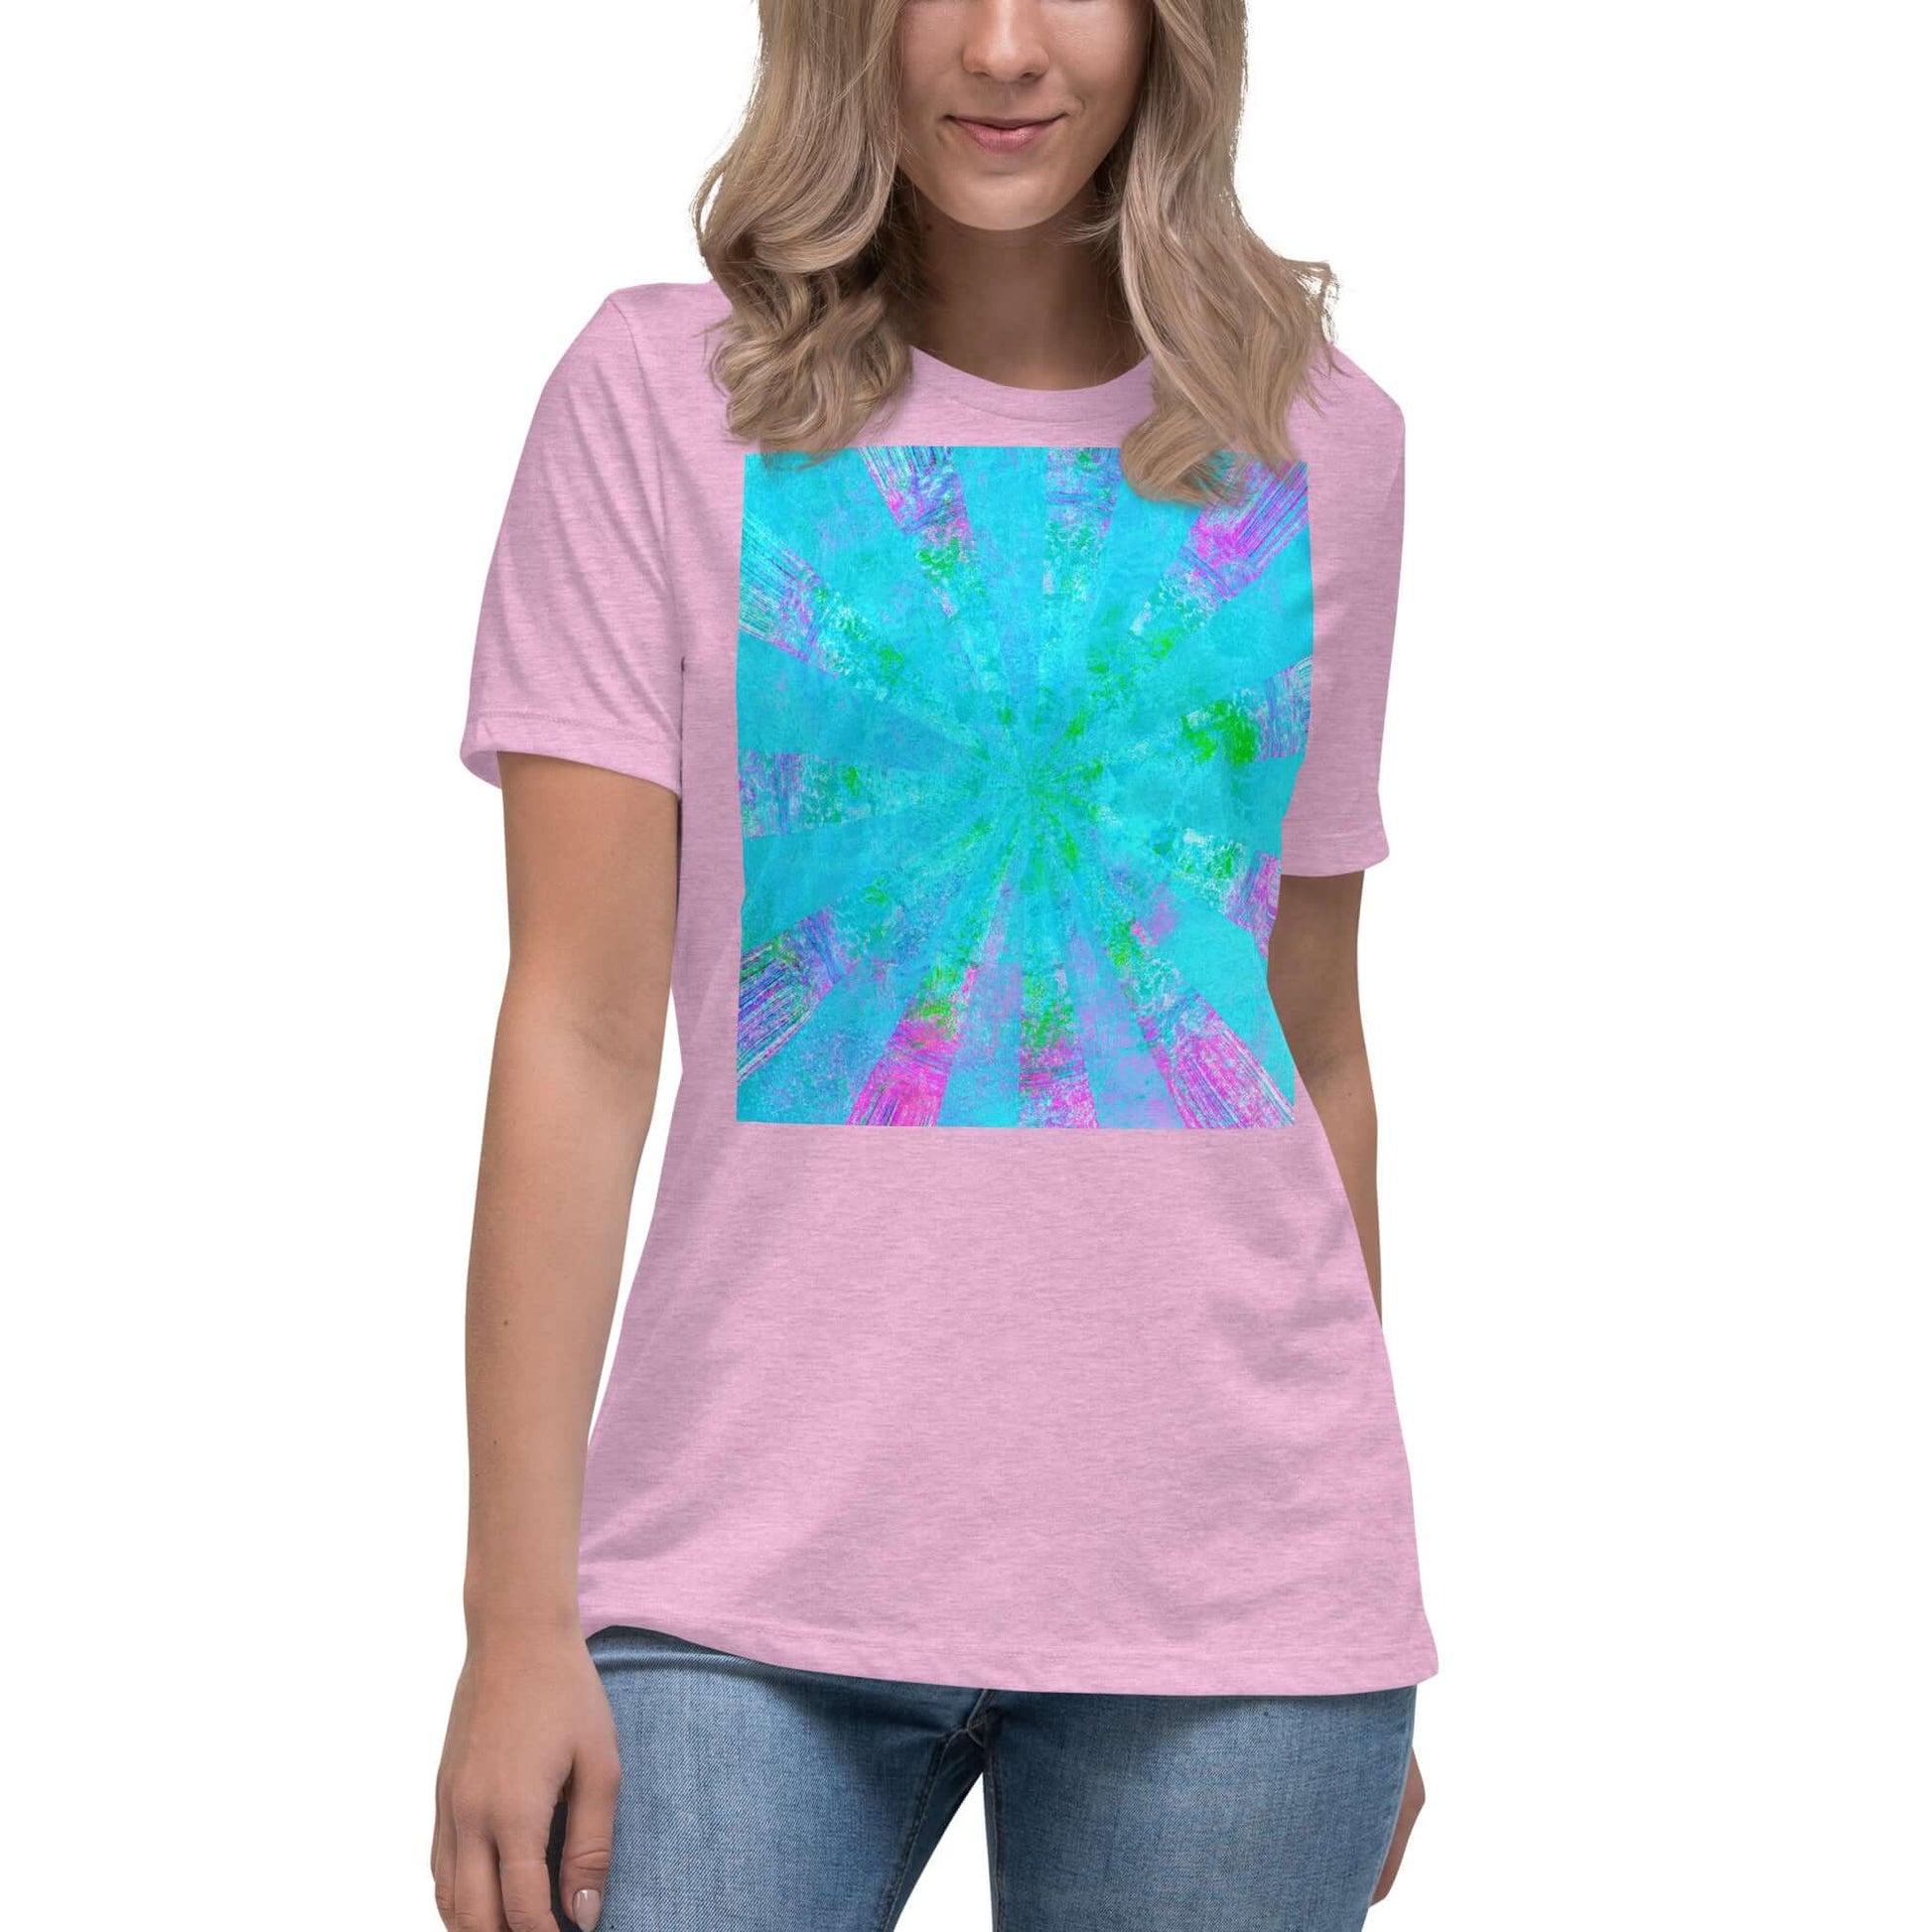 Turquoise Blue with Purple Radial Abstract Art “Blue Stingray” Women’s Short Sleeve Tee in Heather Prism Lilac